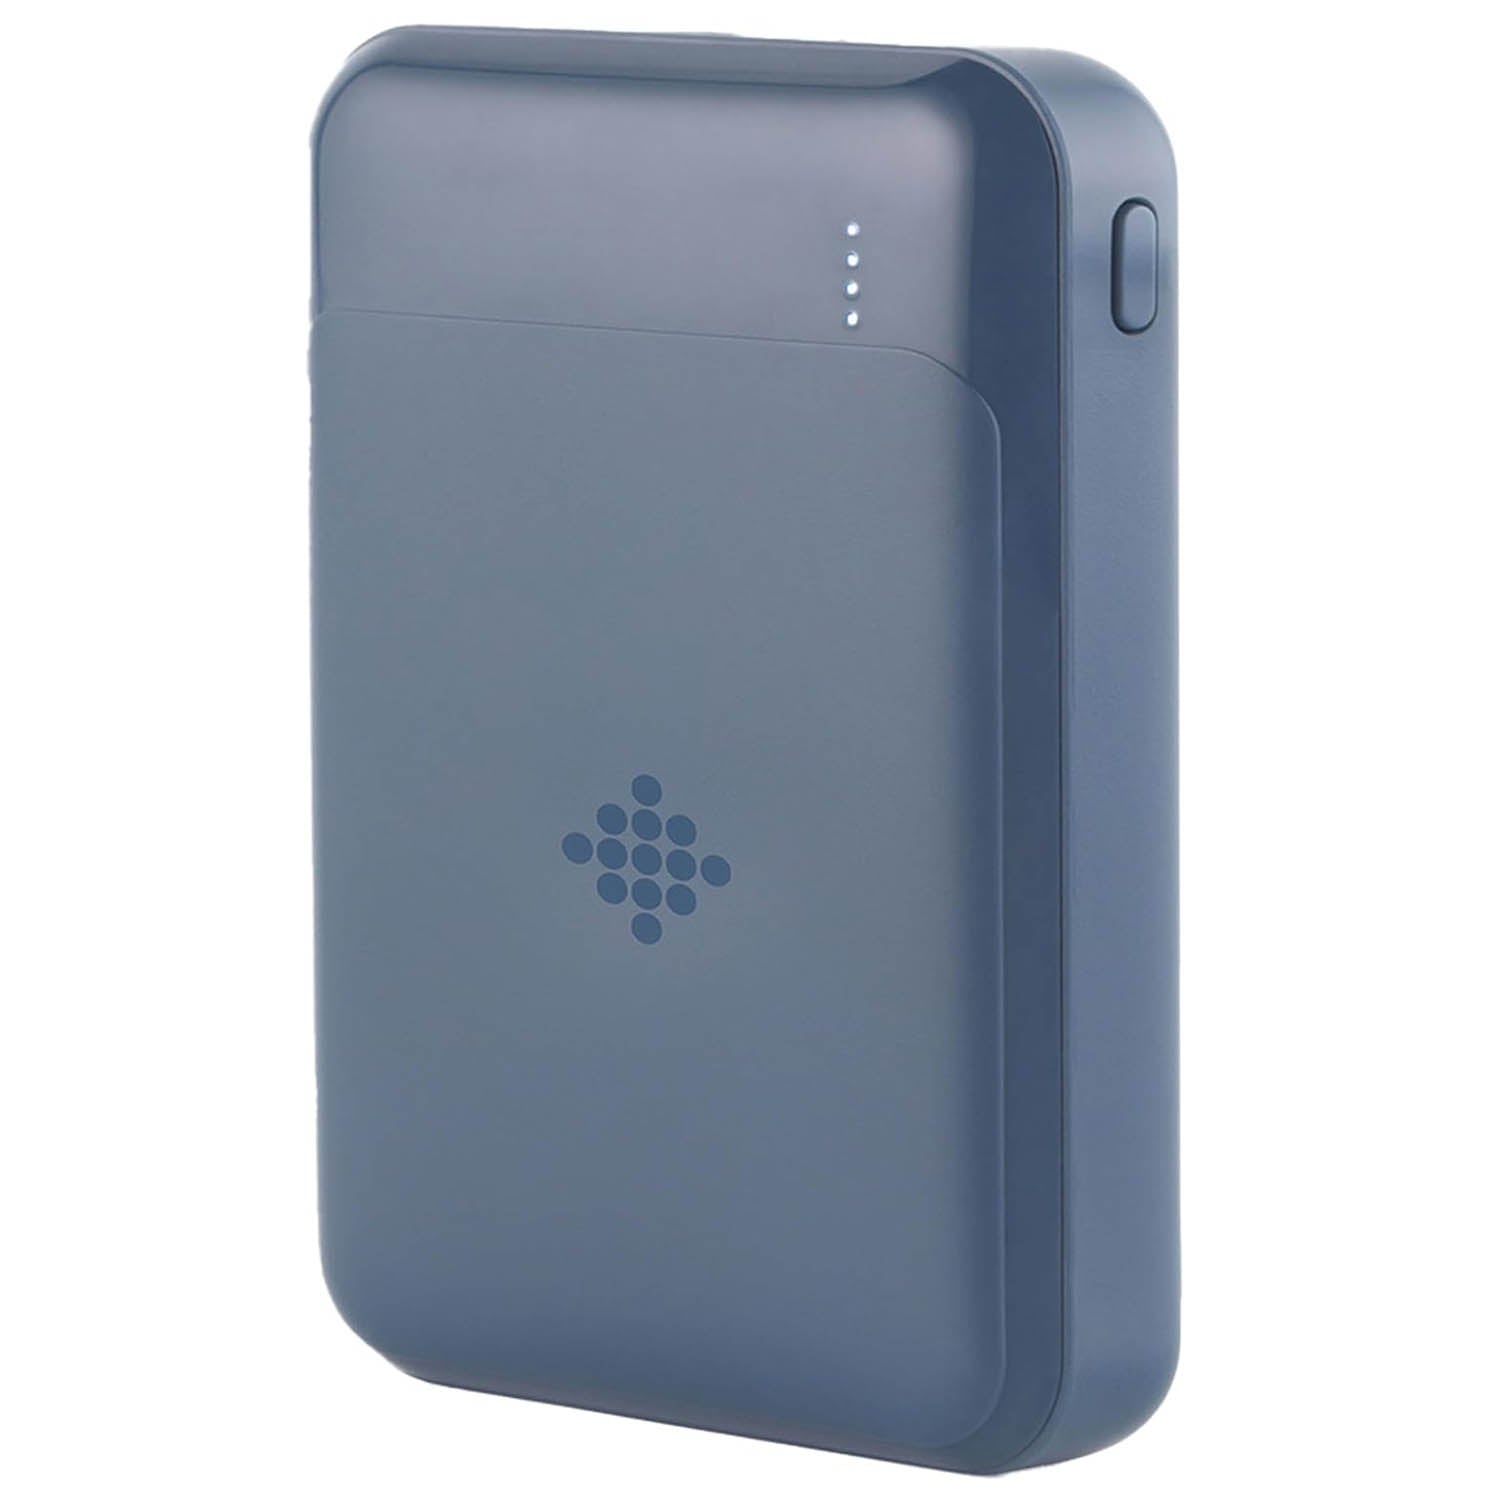 Intempo Blue Fast Charging Power Bank With LED Indicator